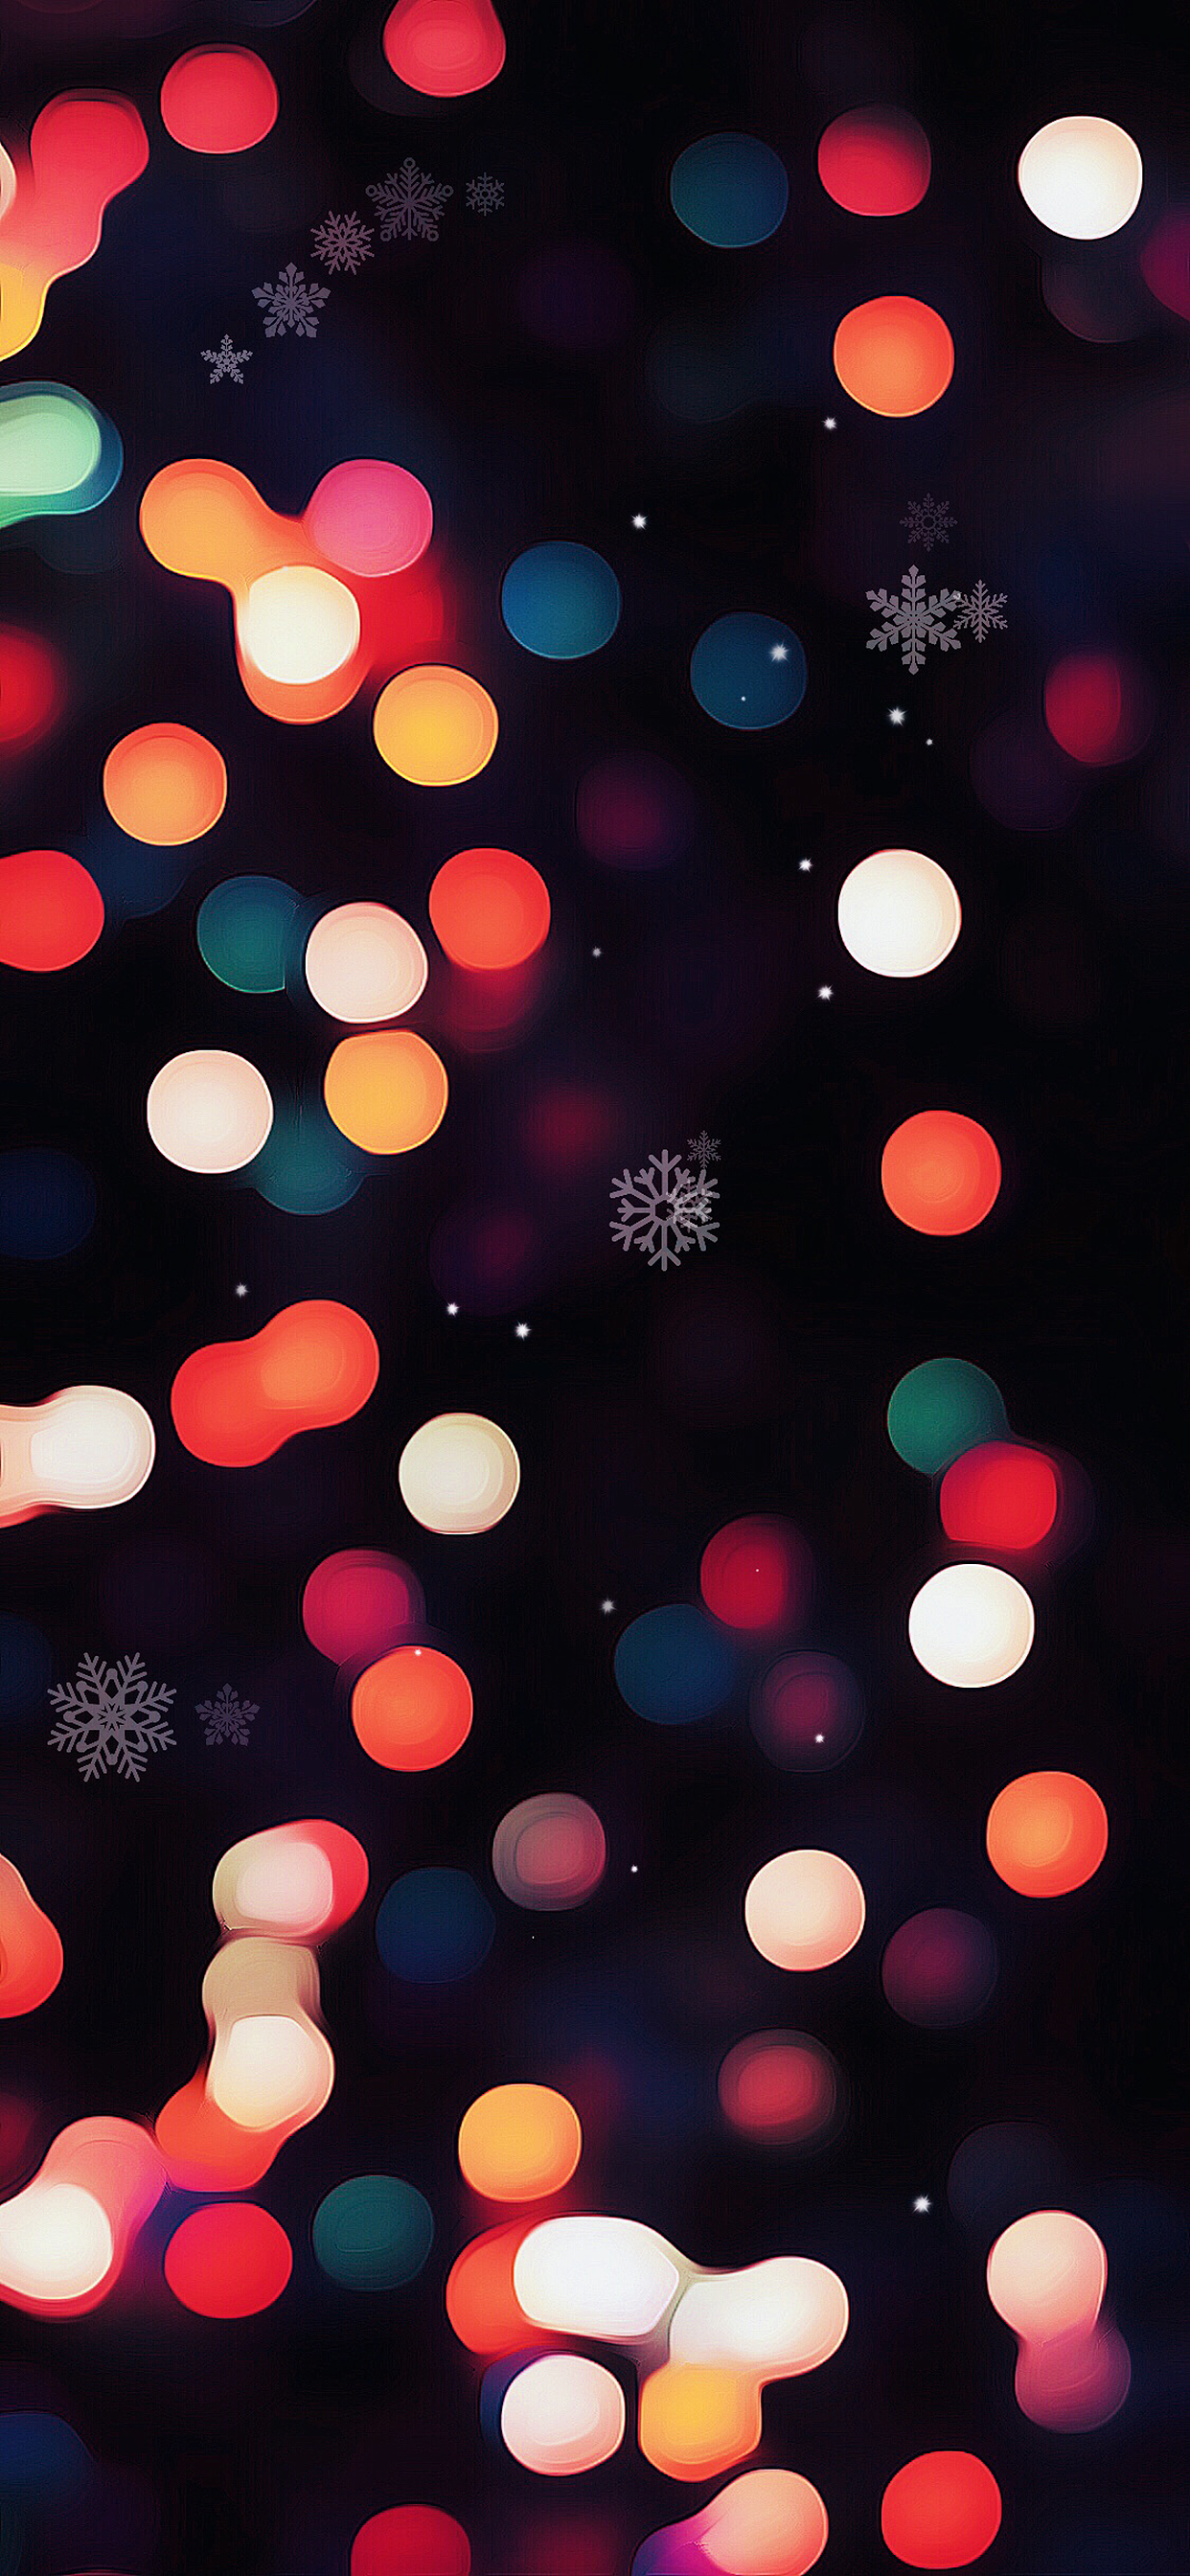 Snowy Winter Christmas Wallpaper For iPhone